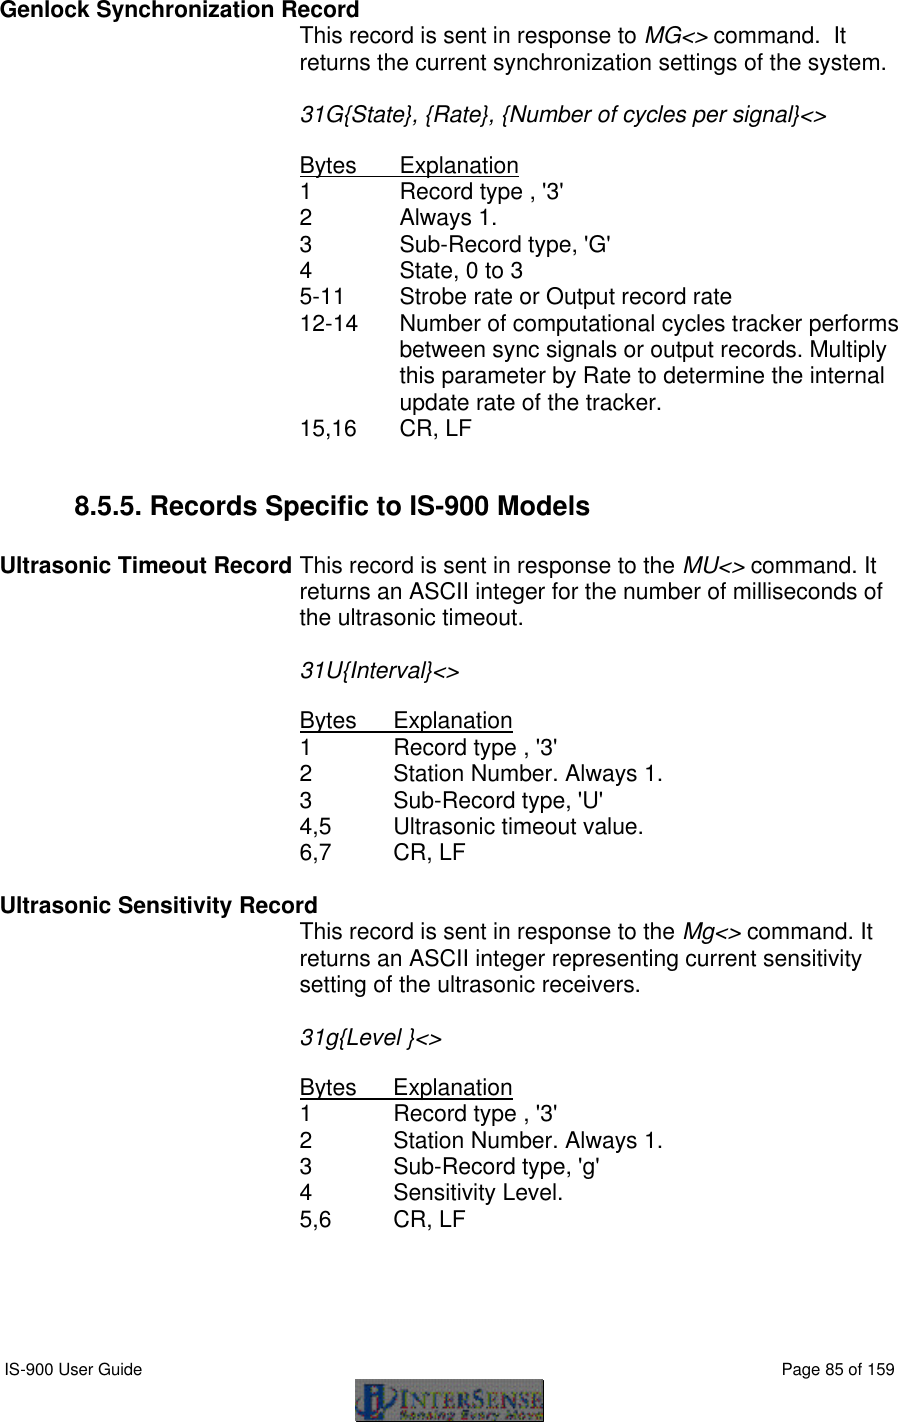  IS-900 User Guide                                                                                                                                          Page 85 of 159  Genlock Synchronization Record  This record is sent in response to MG&lt;&gt; command.  It returns the current synchronization settings of the system.  31G{State}, {Rate}, {Number of cycles per signal}&lt;&gt;  Bytes Explanation 1 Record type , &apos;3&apos; 2 Always 1. 3   Sub-Record type, &apos;G&apos; 4 State, 0 to 3 5-11 Strobe rate or Output record rate 12-14 Number of computational cycles tracker performs between sync signals or output records. Multiply this parameter by Rate to determine the internal update rate of the tracker.   15,16 CR, LF  8.5.5. Records Specific to IS-900 Models  Ultrasonic Timeout Record This record is sent in response to the MU&lt;&gt; command. It returns an ASCII integer for the number of milliseconds of the ultrasonic timeout.    31U{Interval}&lt;&gt;  Bytes Explanation 1 Record type , &apos;3&apos; 2 Station Number. Always 1. 3   Sub-Record type, &apos;U&apos; 4,5 Ultrasonic timeout value. 6,7 CR, LF  Ultrasonic Sensitivity Record This record is sent in response to the Mg&lt;&gt; command. It returns an ASCII integer representing current sensitivity setting of the ultrasonic receivers.    31g{Level }&lt;&gt;  Bytes Explanation 1 Record type , &apos;3&apos; 2 Station Number. Always 1. 3   Sub-Record type, &apos;g&apos; 4 Sensitivity Level. 5,6 CR, LF  